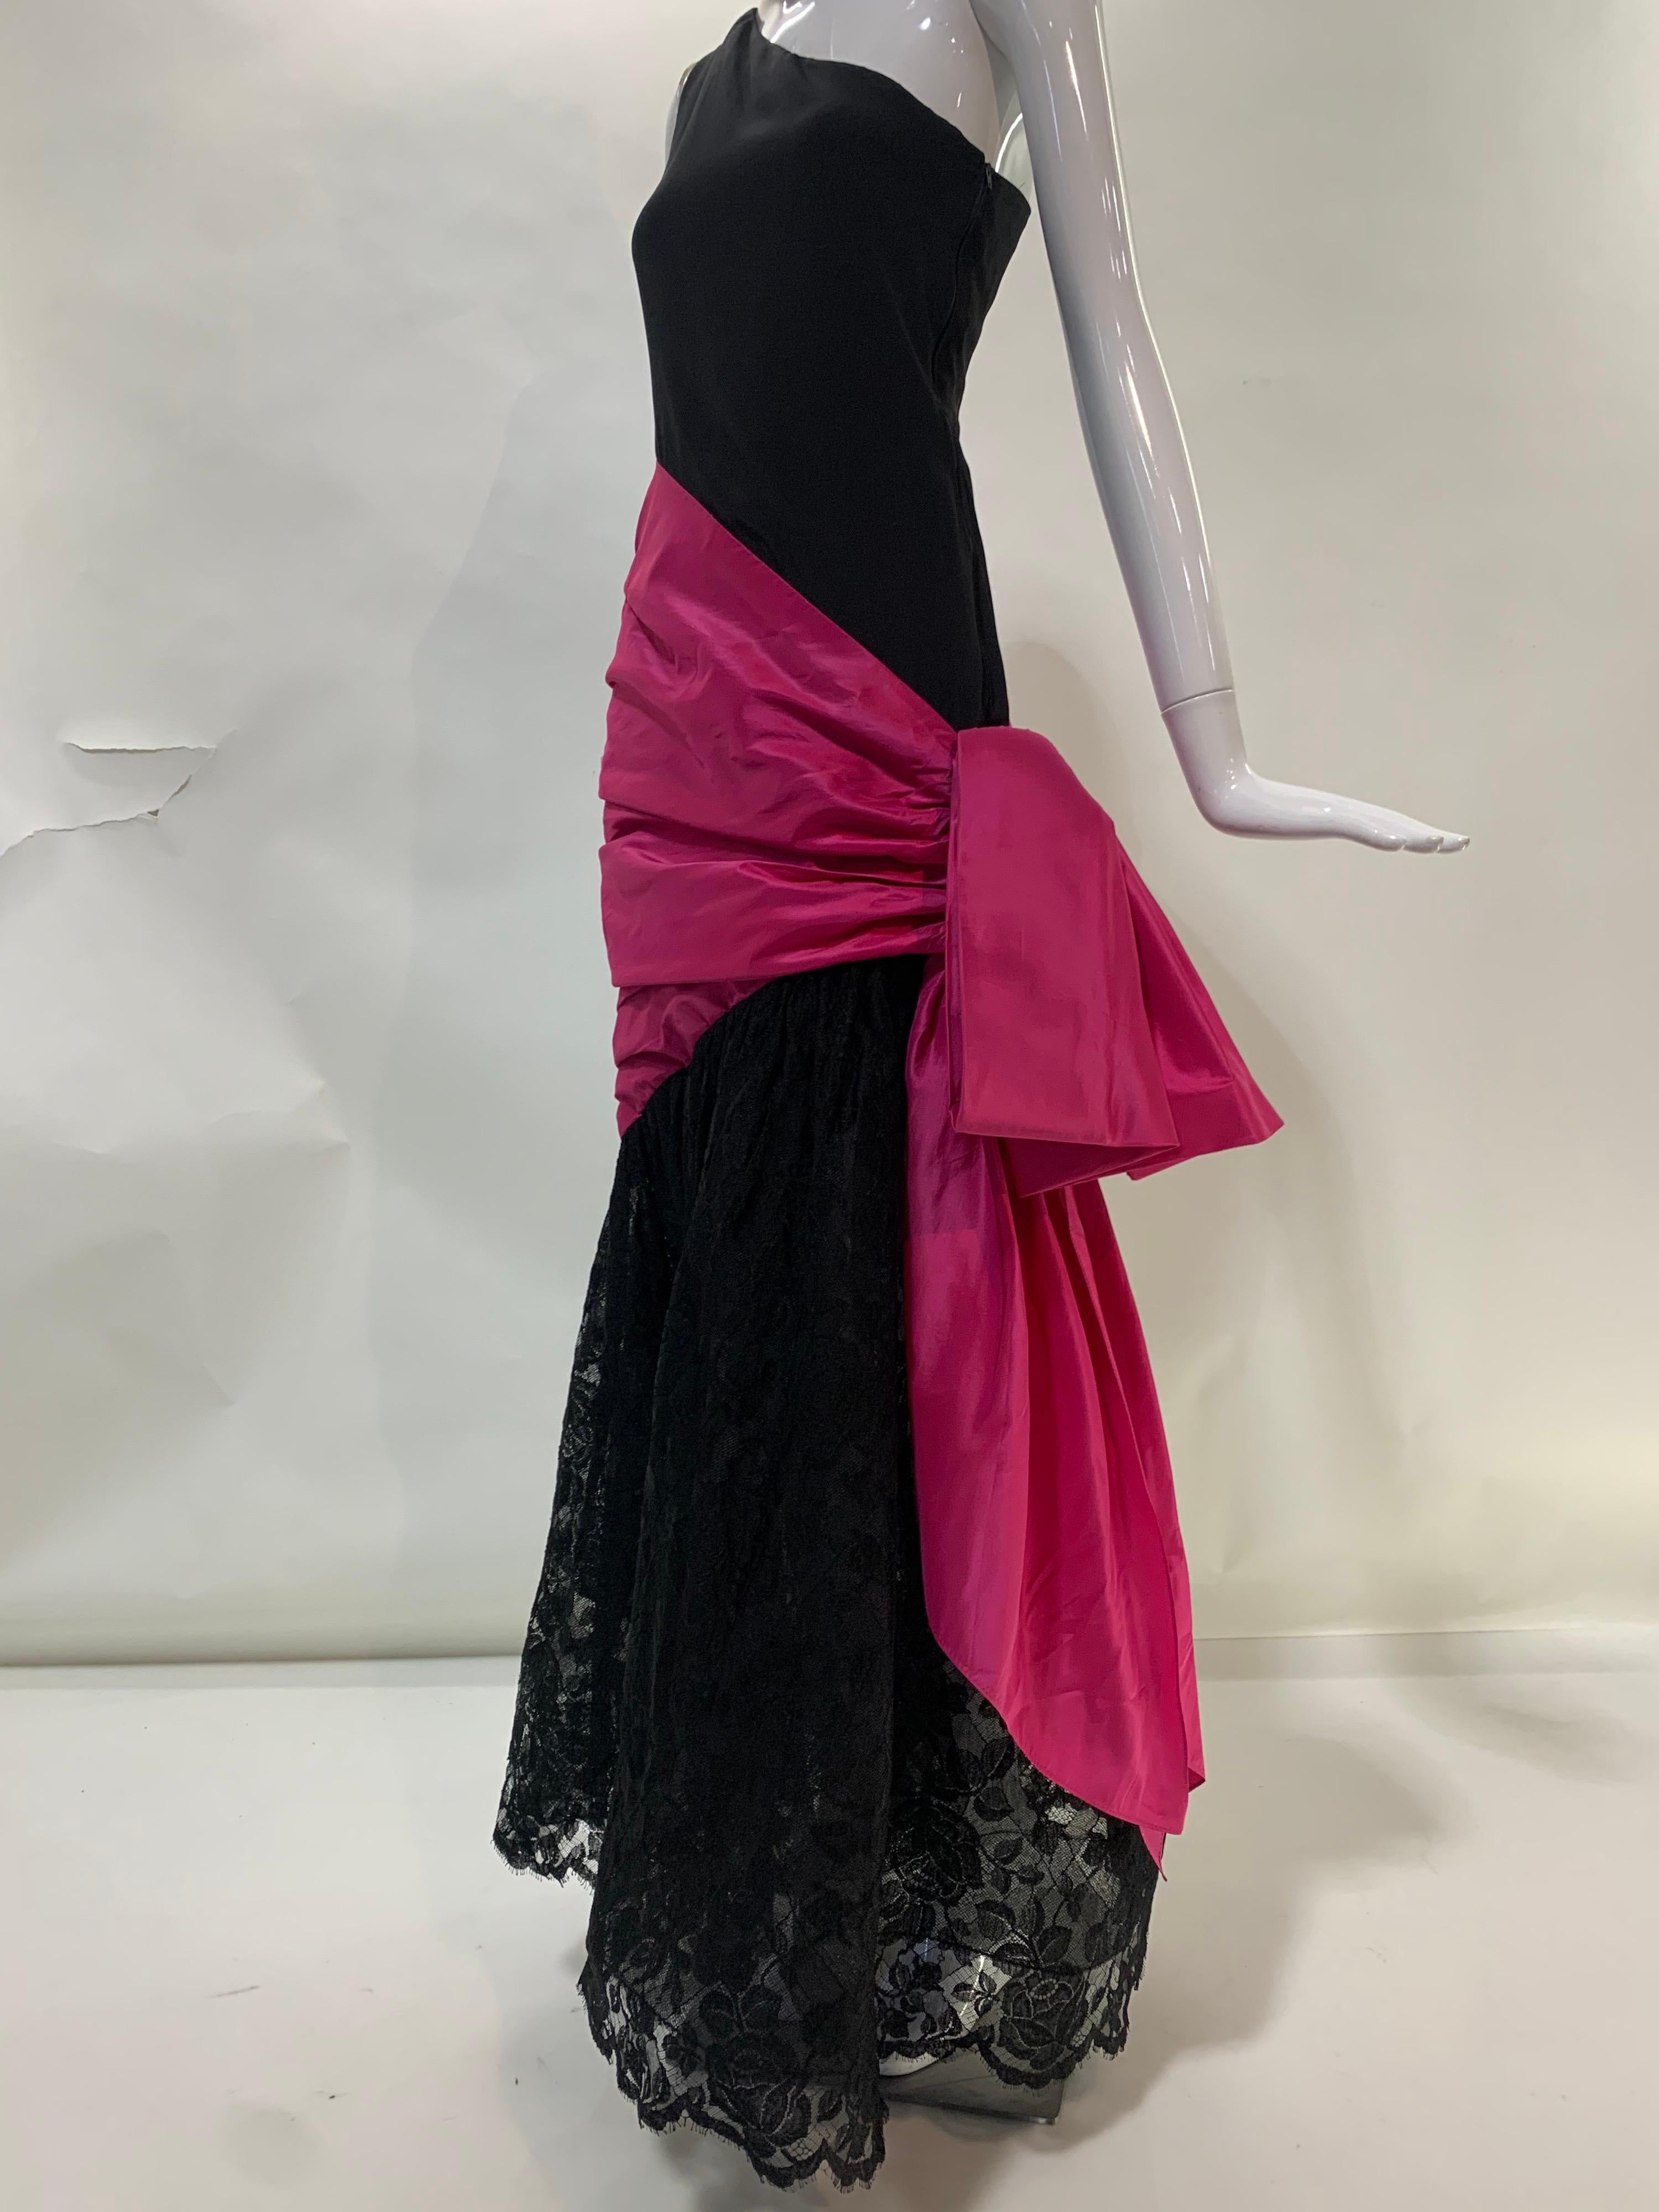 1980 Bill Blass Black Silk Crepe One-Shoulder Gown w/ Lace Skirt and Fuchsia Bow For Sale 14